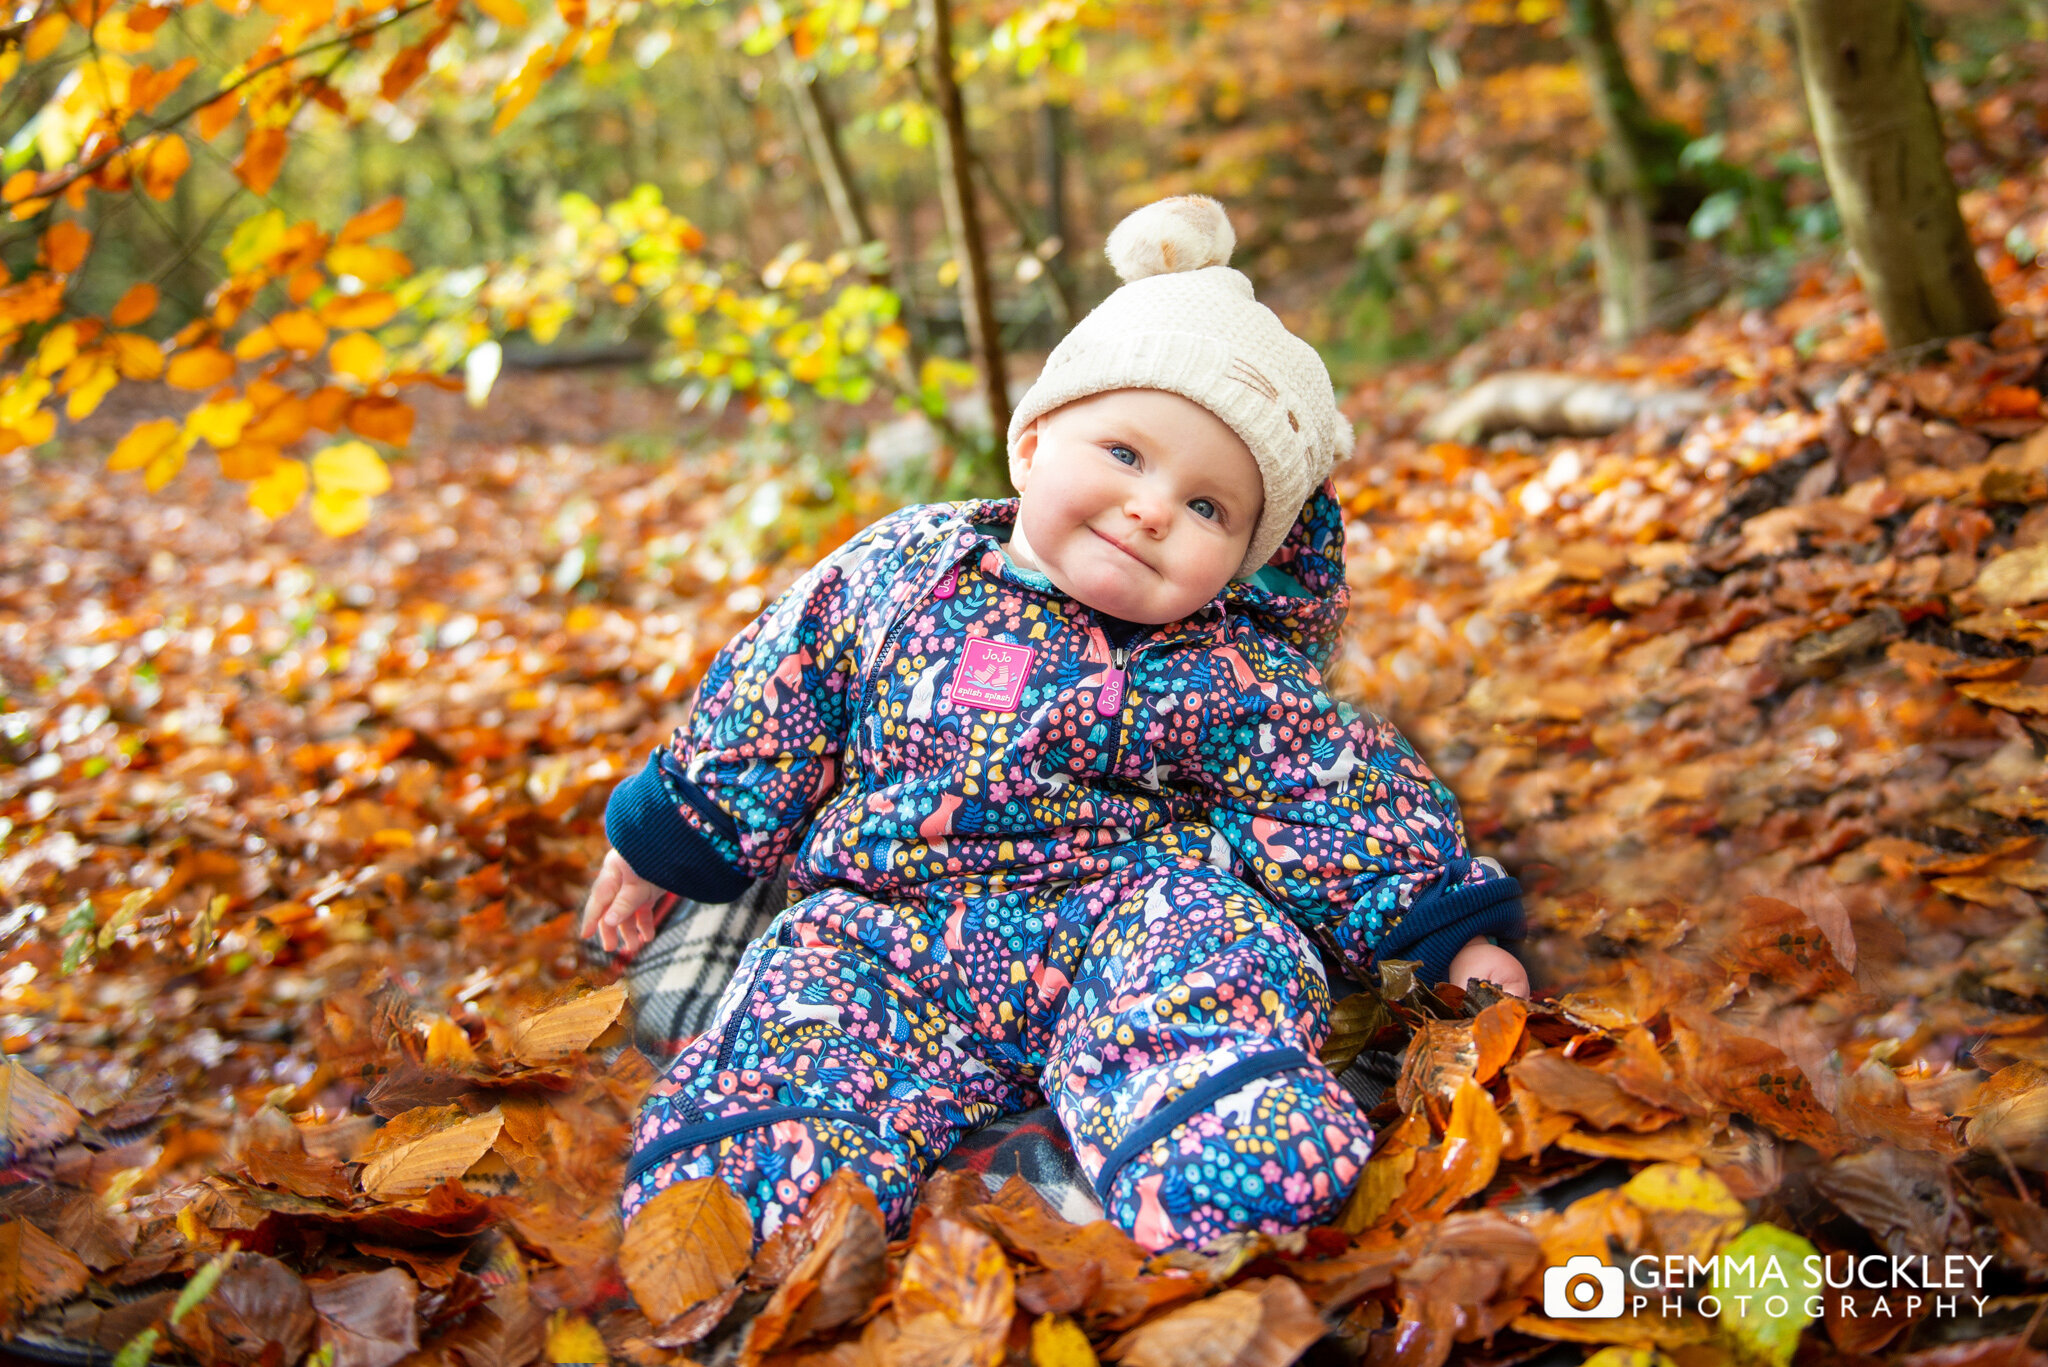 a baby sitting on a pile of autumn leafs in skipton wood